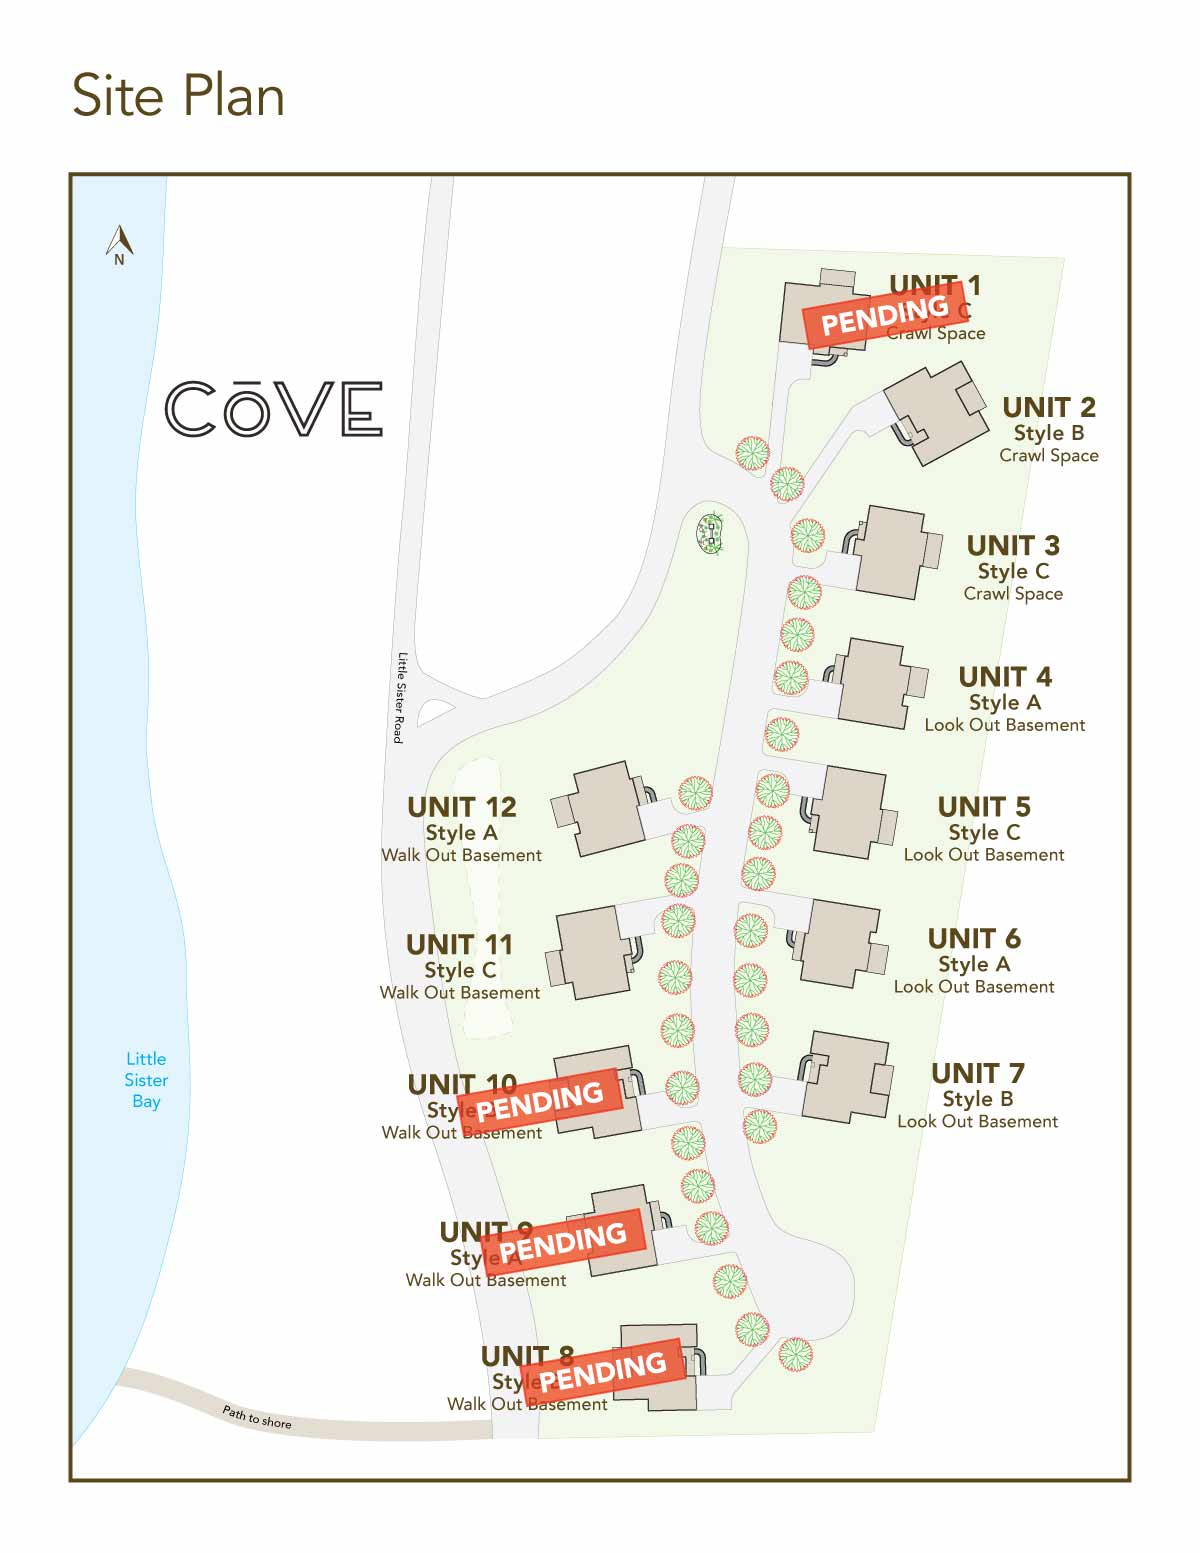 The Cove Site Plan